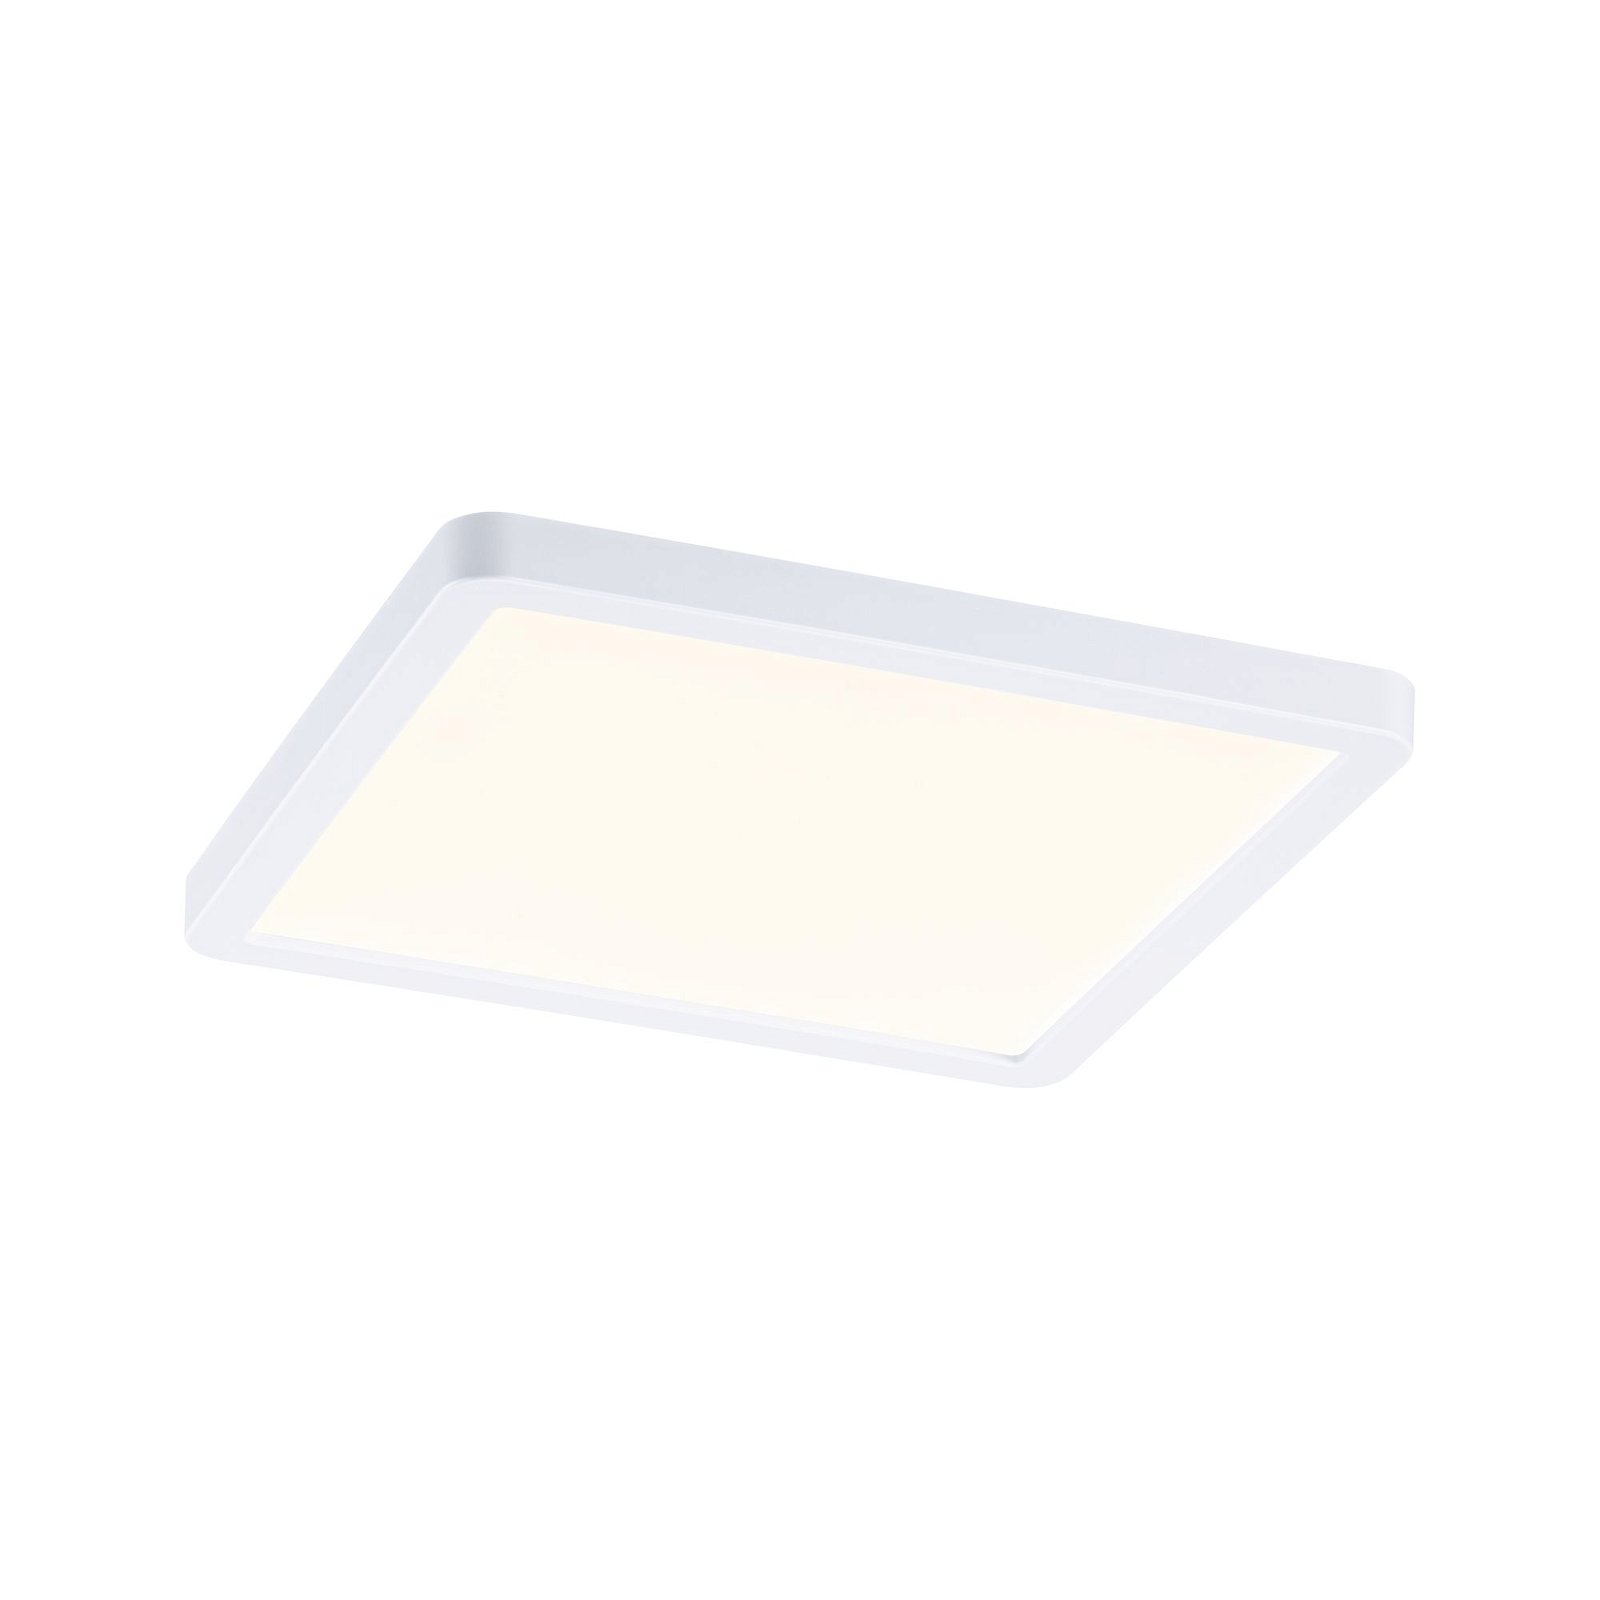 VariFit LED Recessed panel Dim to Warm Areo IP44 square 175x175mm 13W 1200lm 3 Step Dim to warm Matt white dimmable